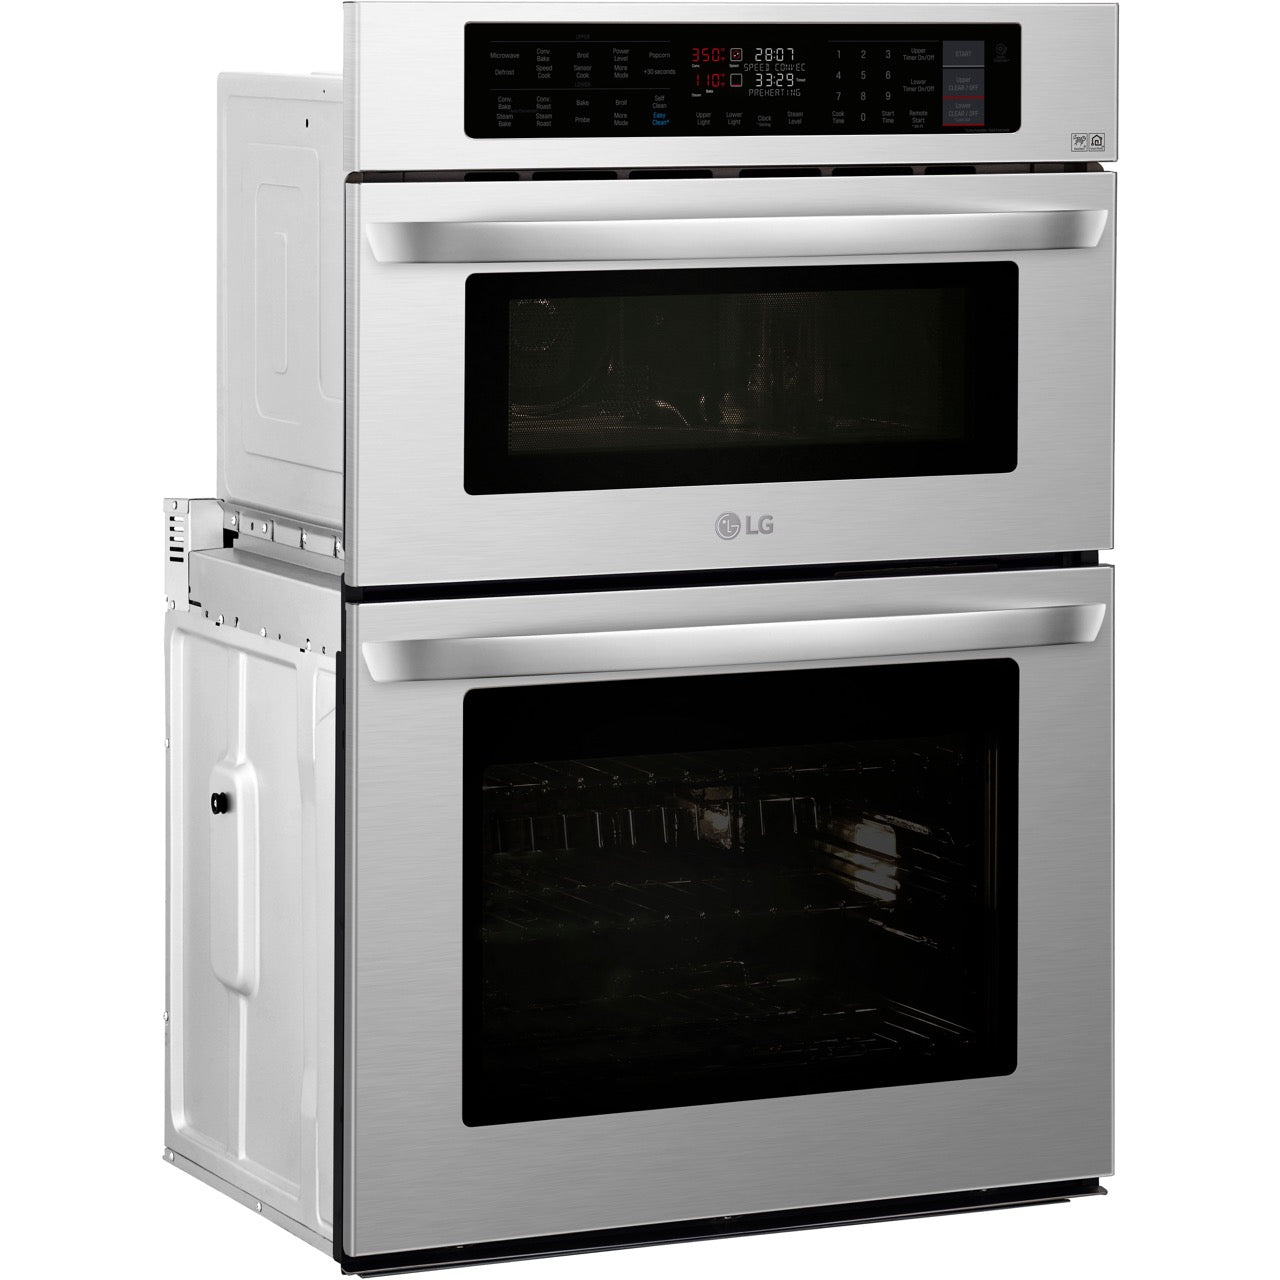 LG Electronics 30 in. Combination Wall Oven in Stainless Steel (LWC3063ST)